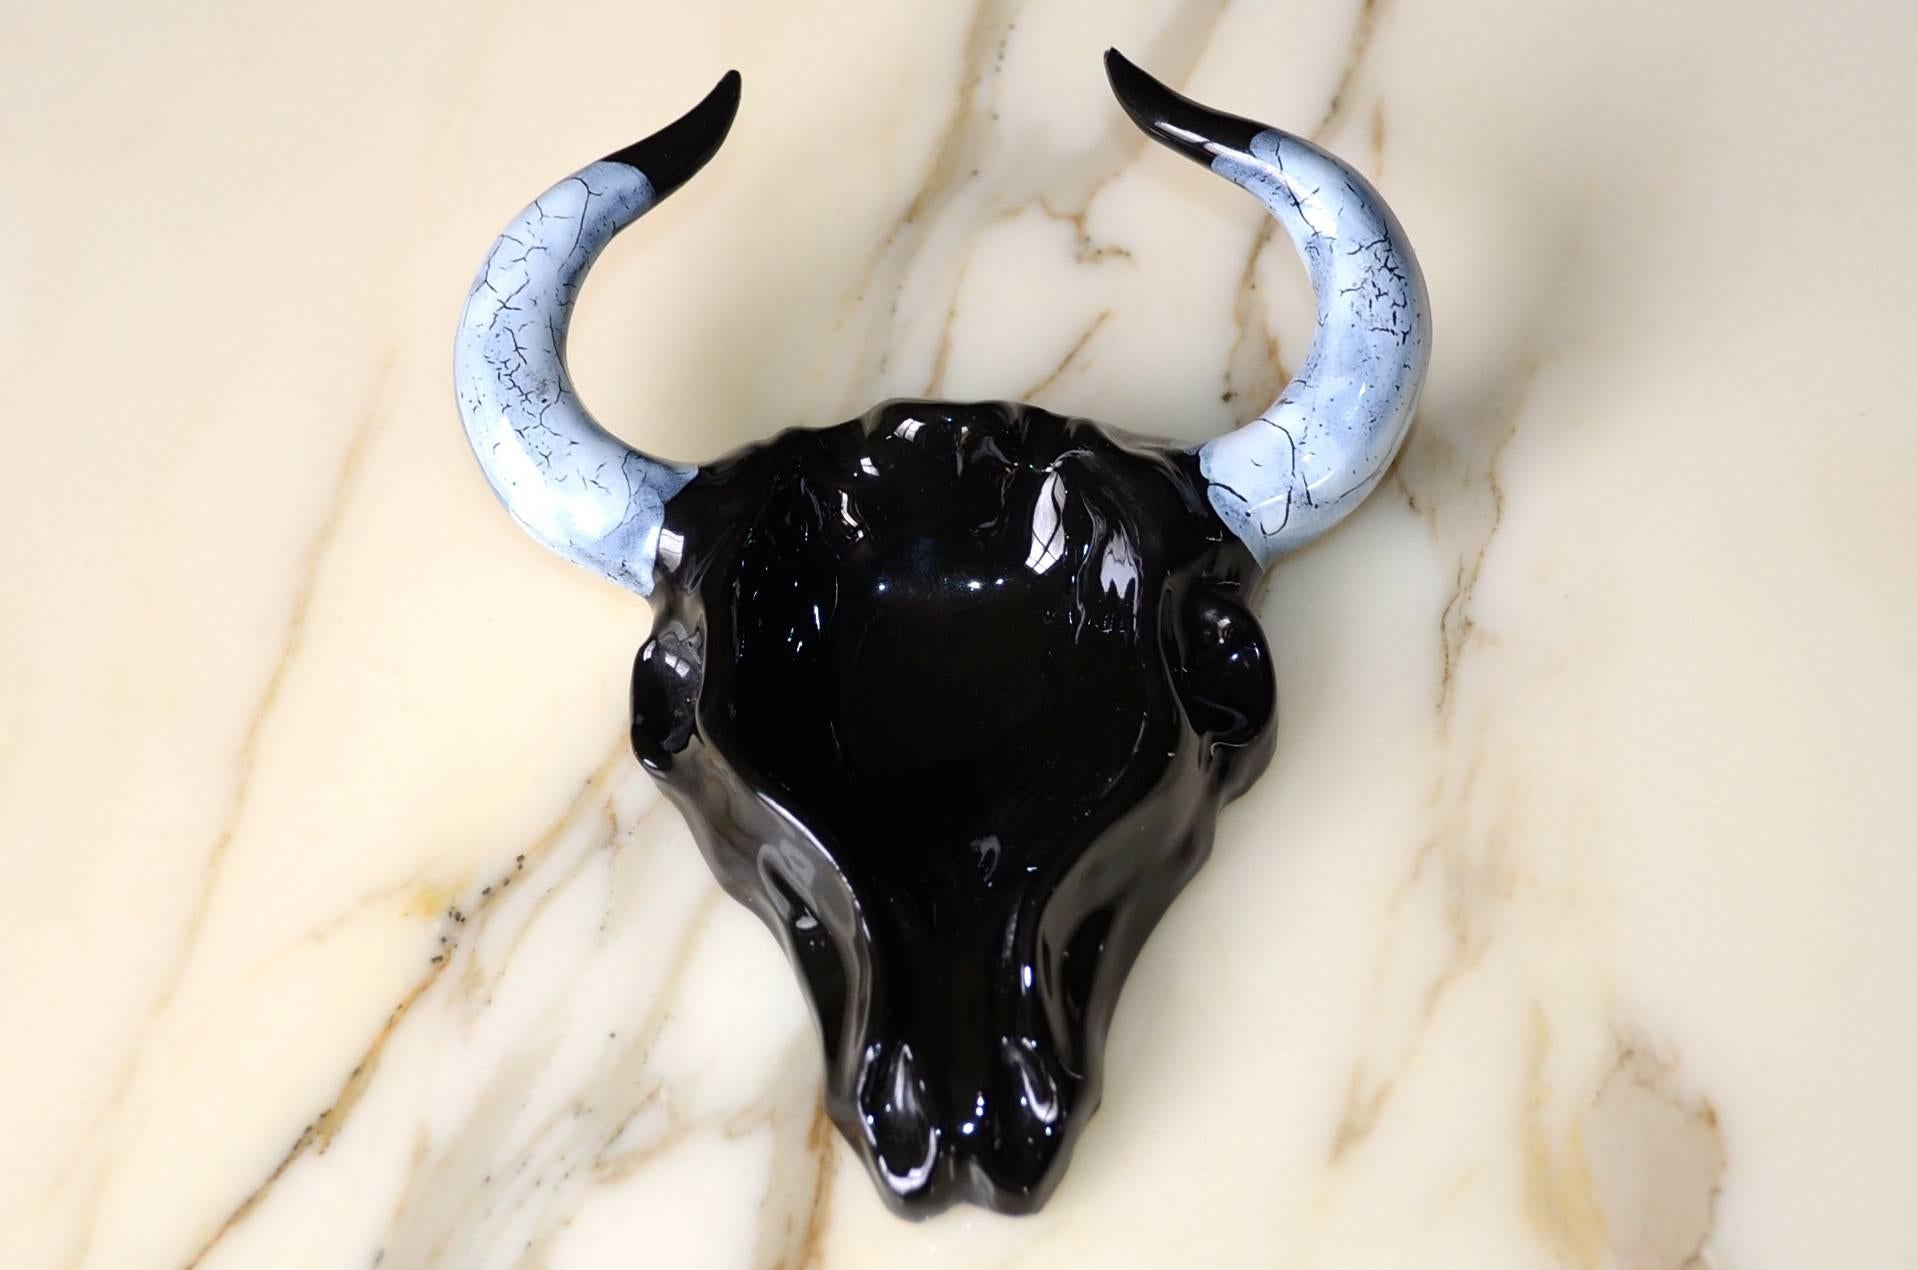 Superb head of a bull in enamelled terracotta of the years 50/60 by the French artist Paul Artus. More than ever Artus creates an harmonious synthesis of his qualities as a painter and ceramist through this work. Perfect conditions.